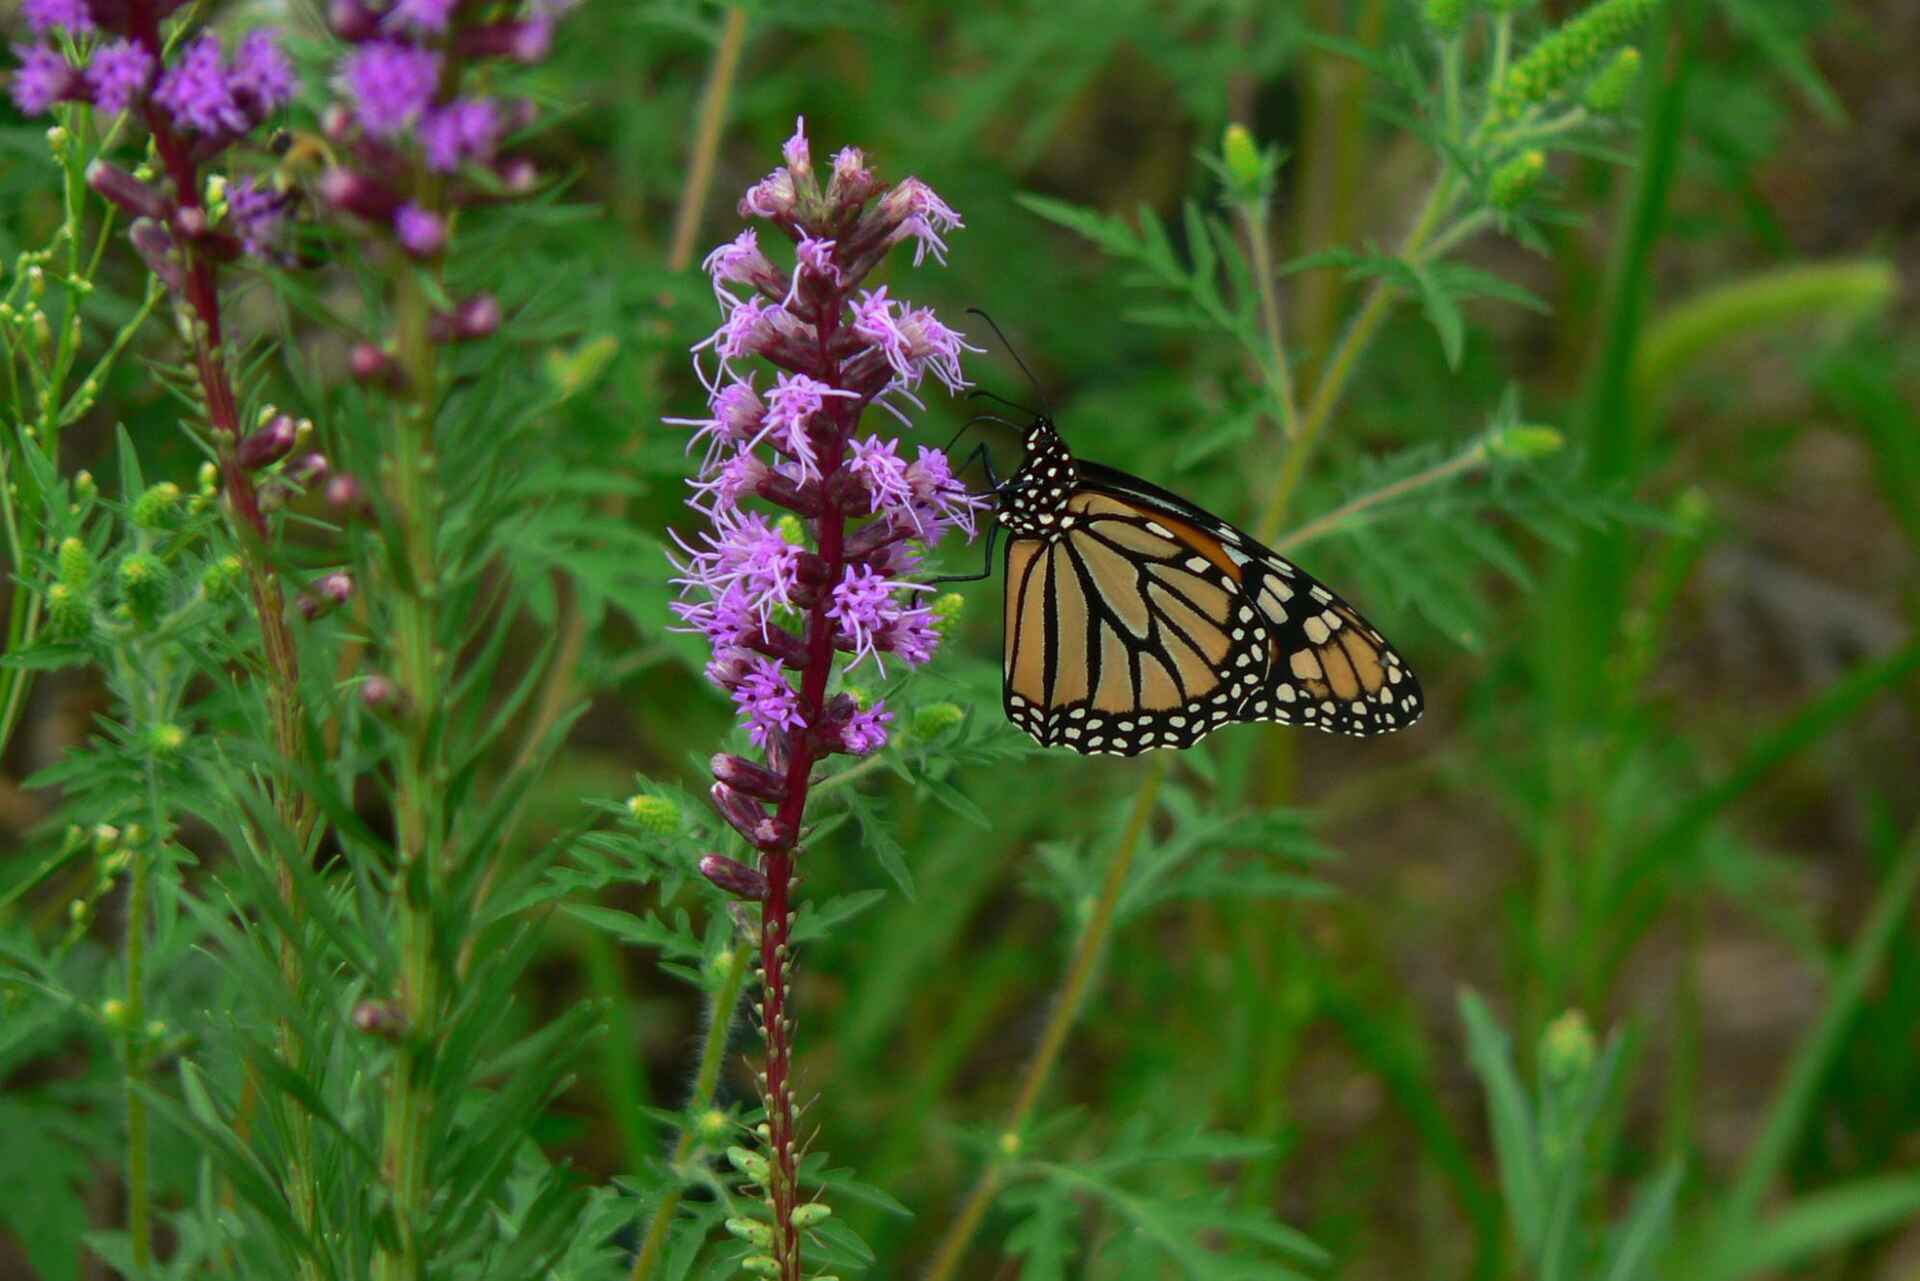 "A Monarch butterfly with its distinctive orange and black patterned wings feeding on a cluster of purple flowers amidst a green foliage background